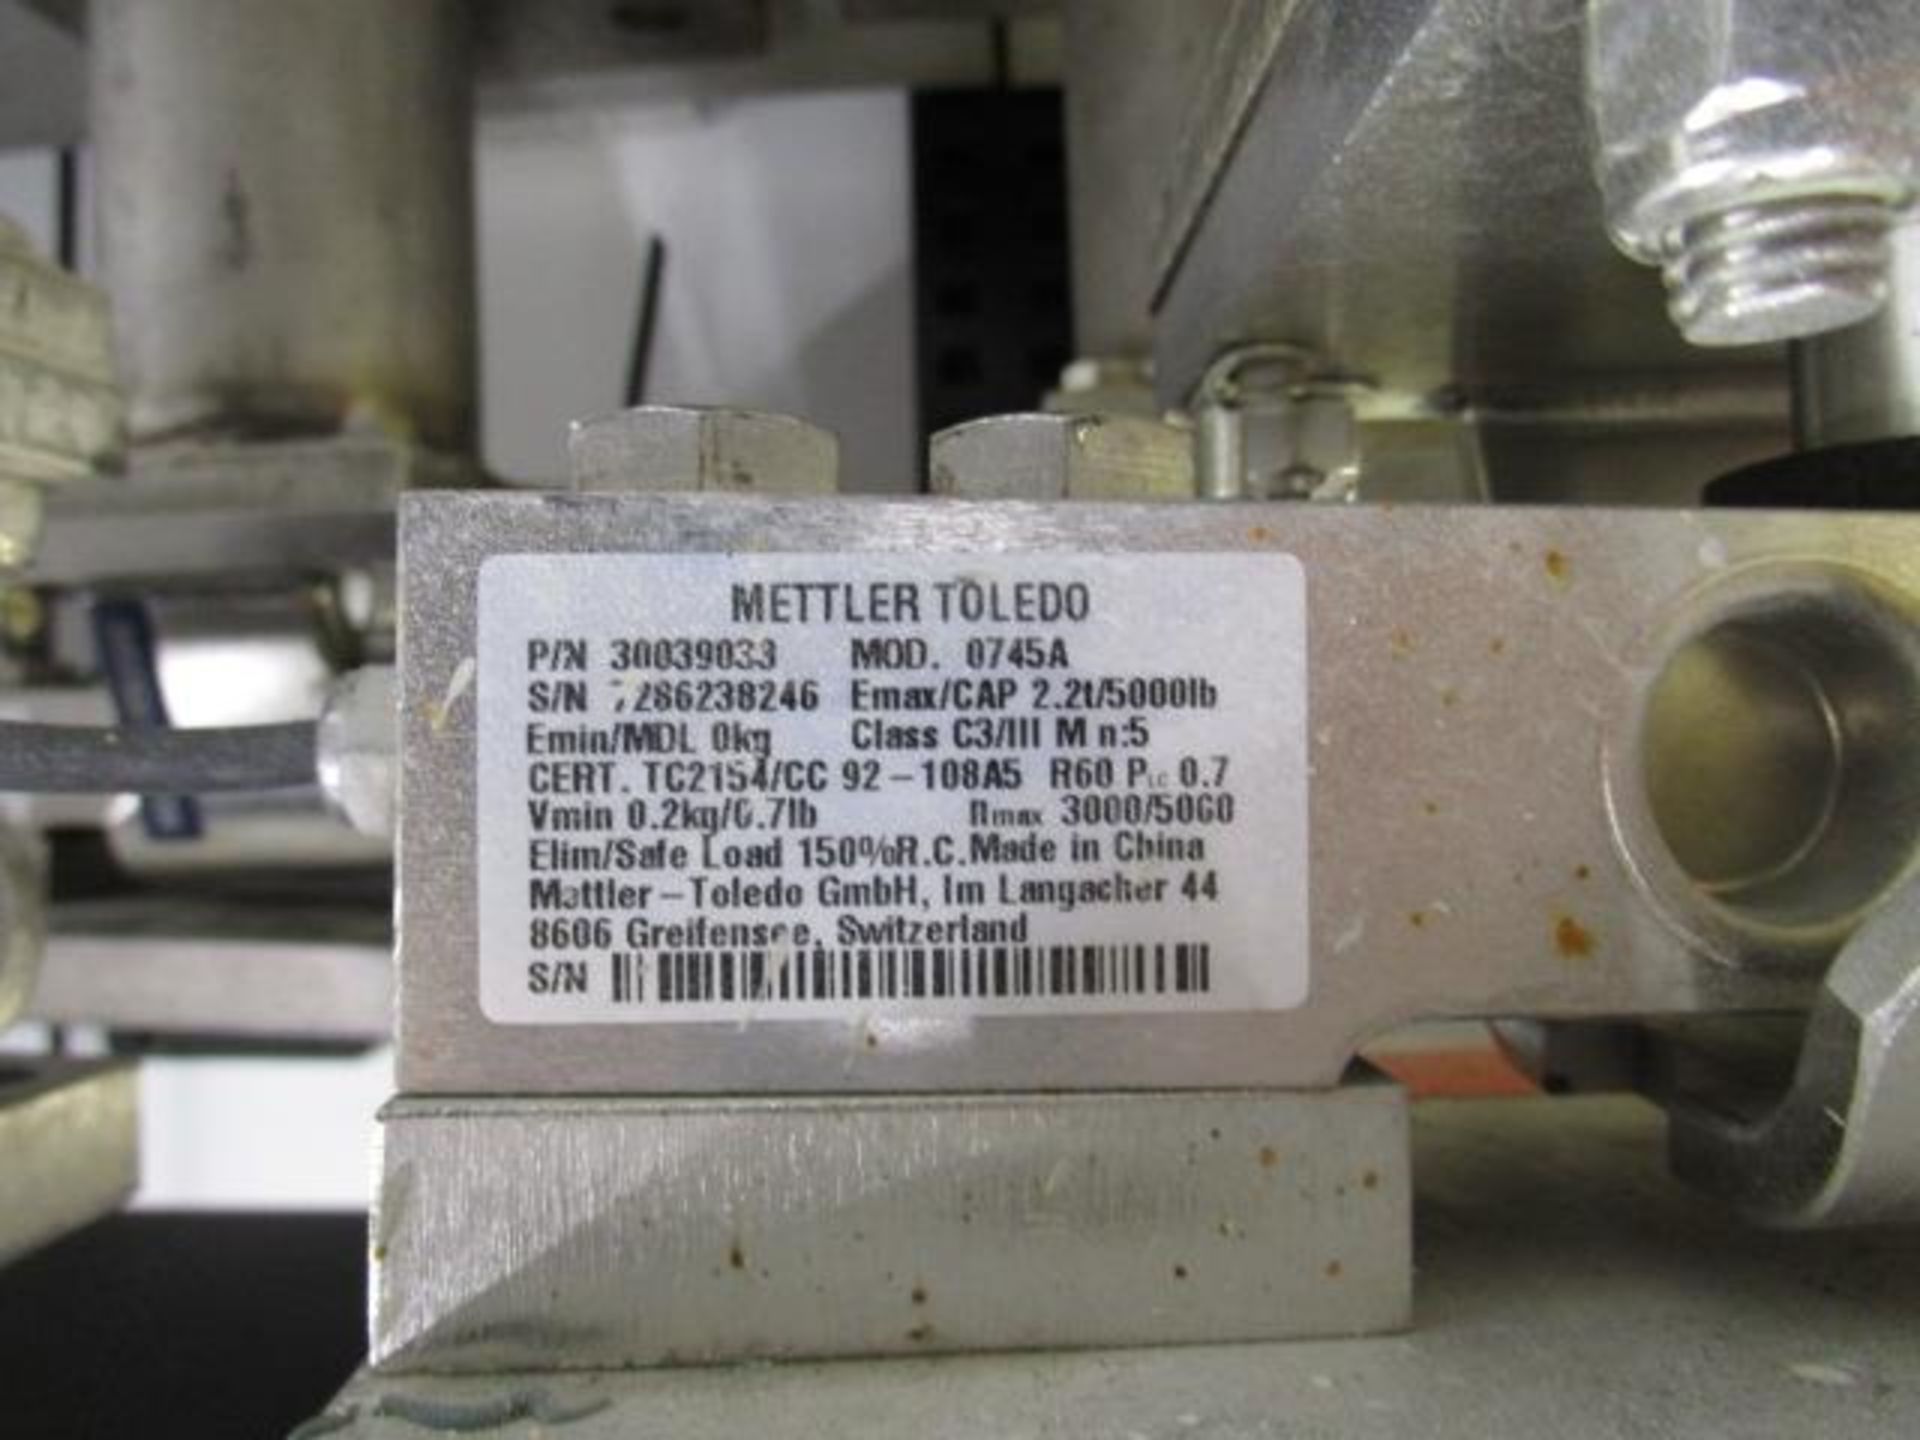 METTLER TOLEDO LOT CONSISTING OF QTY-6 METTLER TOLEDO 0745A LOAD CELLS - Image 4 of 4